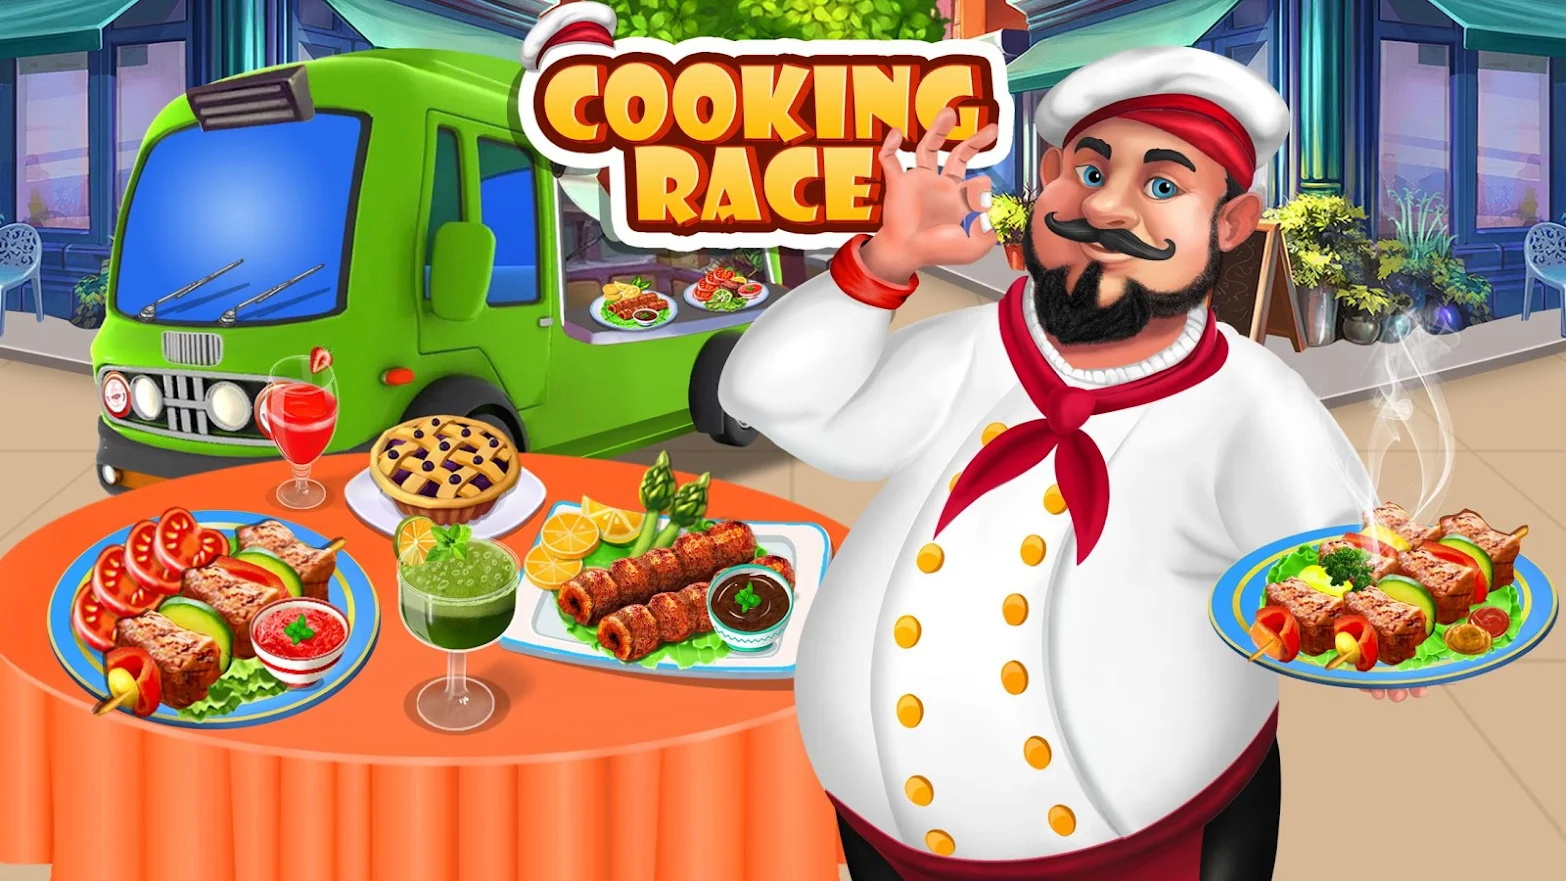 ⿱Cooking Race Chef Fun Restaurant Gamev2.7 °